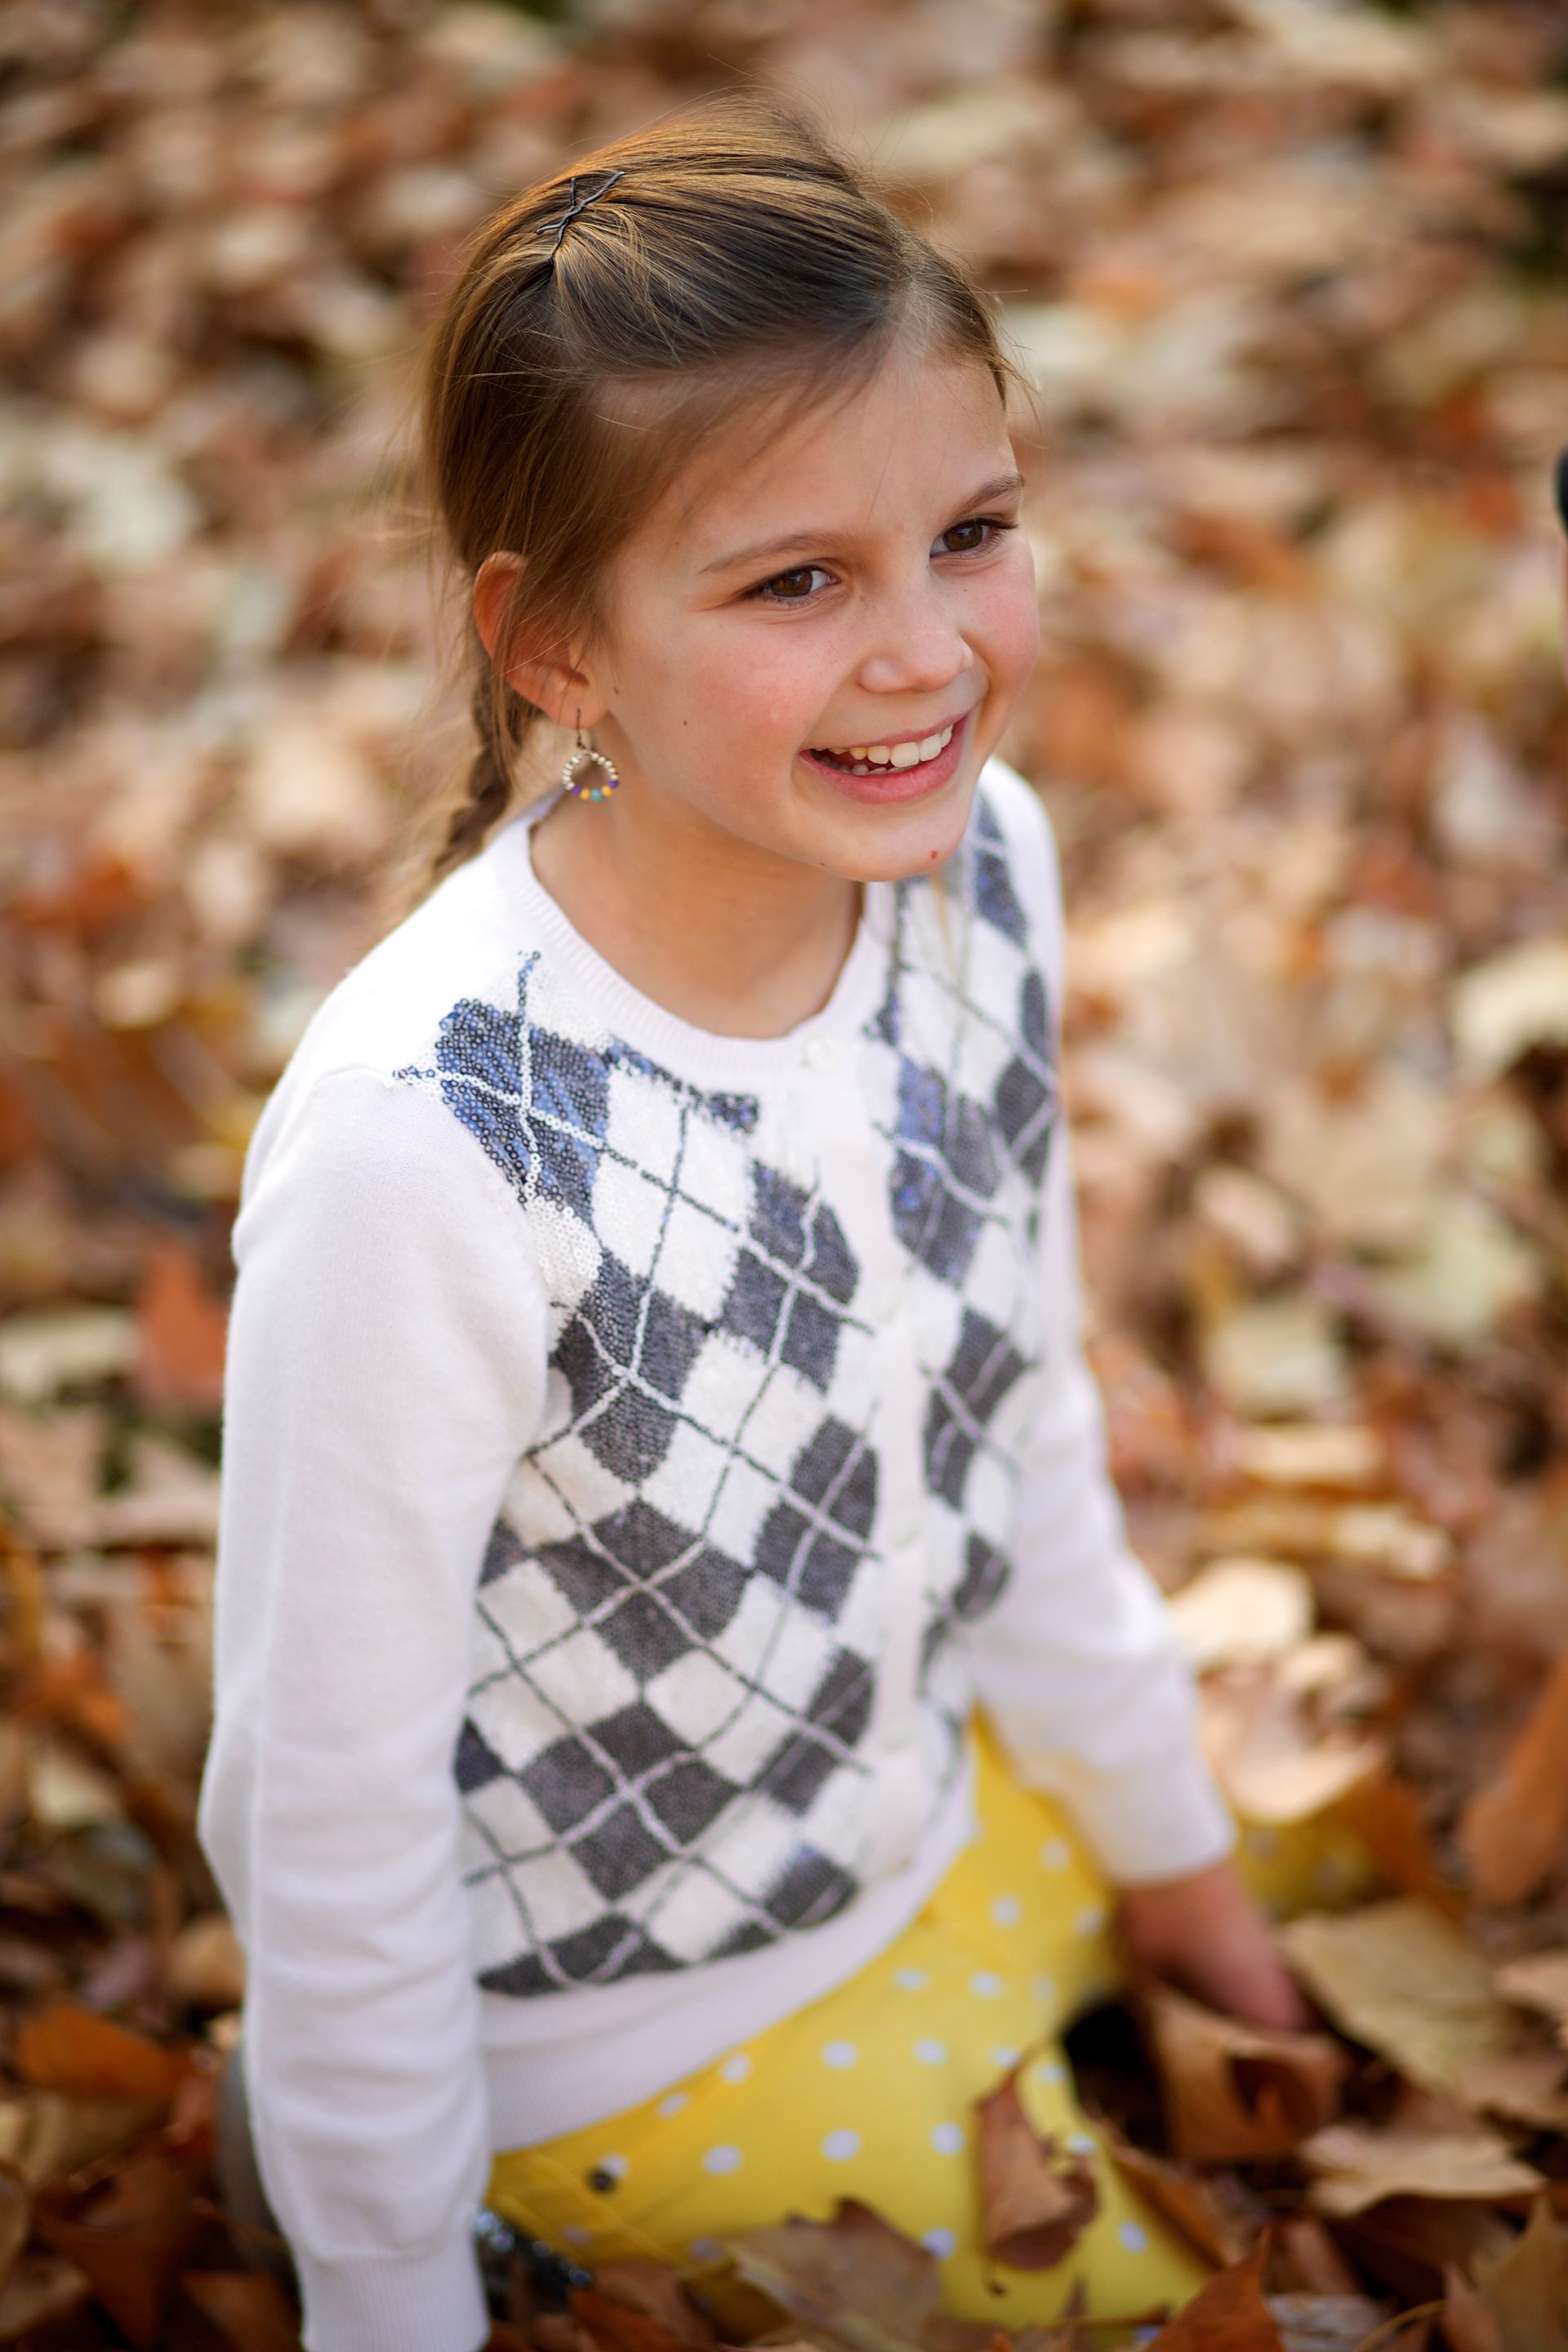 A young girl is playing in a pile of leaves in the fall.